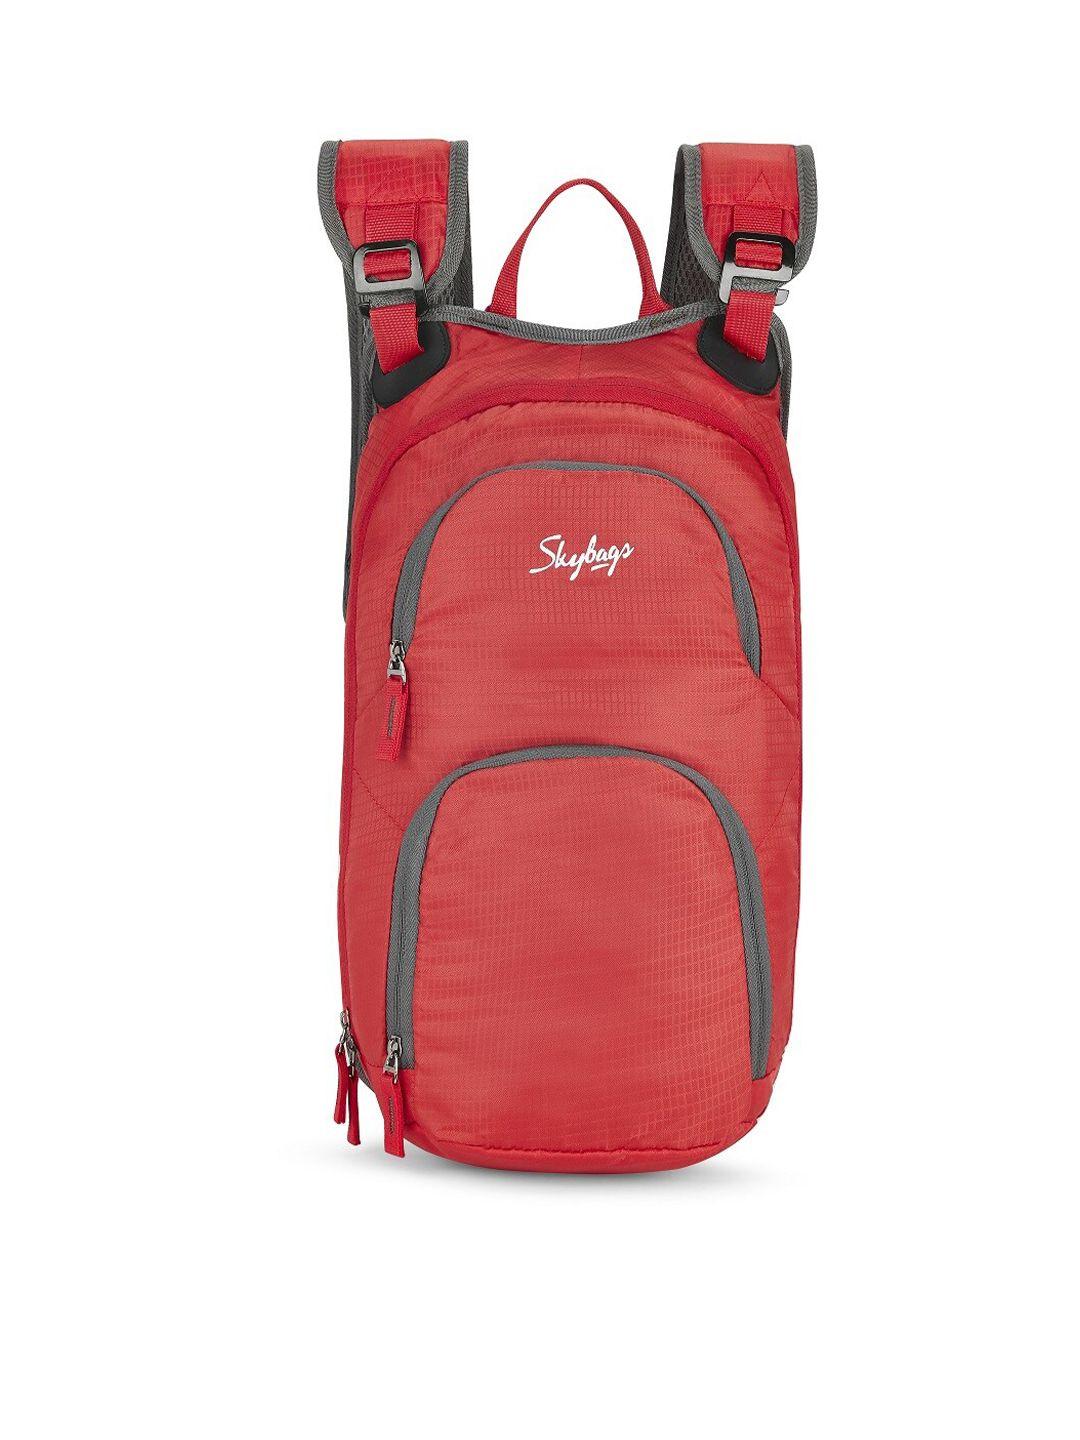 skybags unisex brand logo backpack